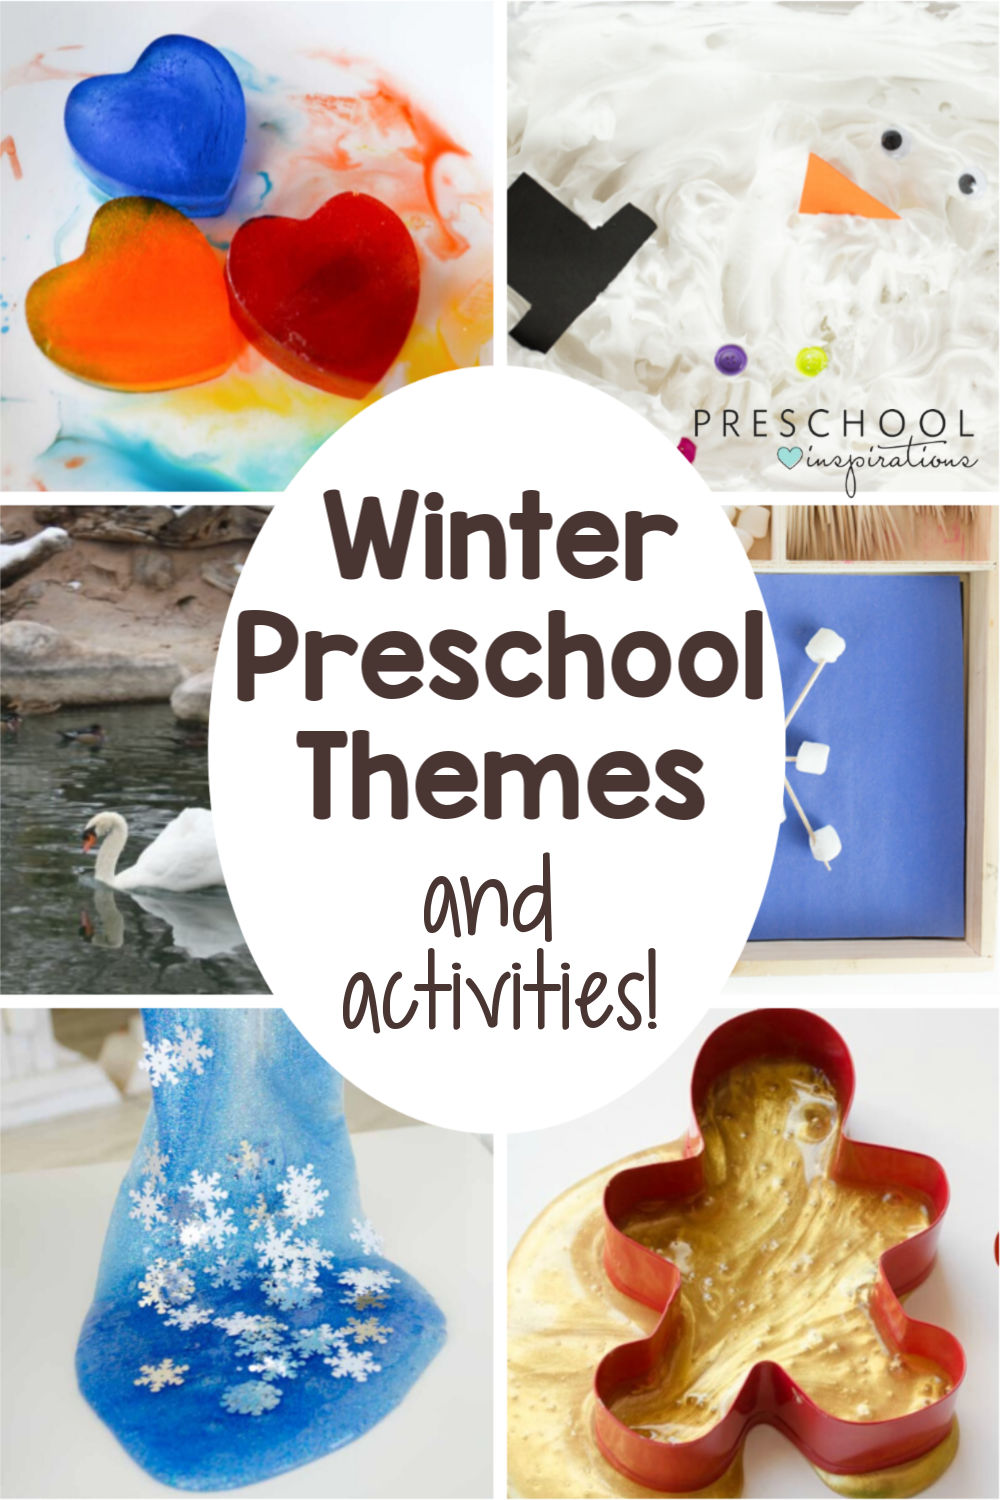 When it comes to teaching preschool in the winter, there are SO many fun themes to choose from! Arctic animals, gingerbread, family, and fun holiday themes like Christmas, New Years, and Valentines Day! Find crafts, activities, and more to go along with each. #preschoolinspirations #winter #preschool #prek #winterthemes #preschoolthemes #kidsactivities 